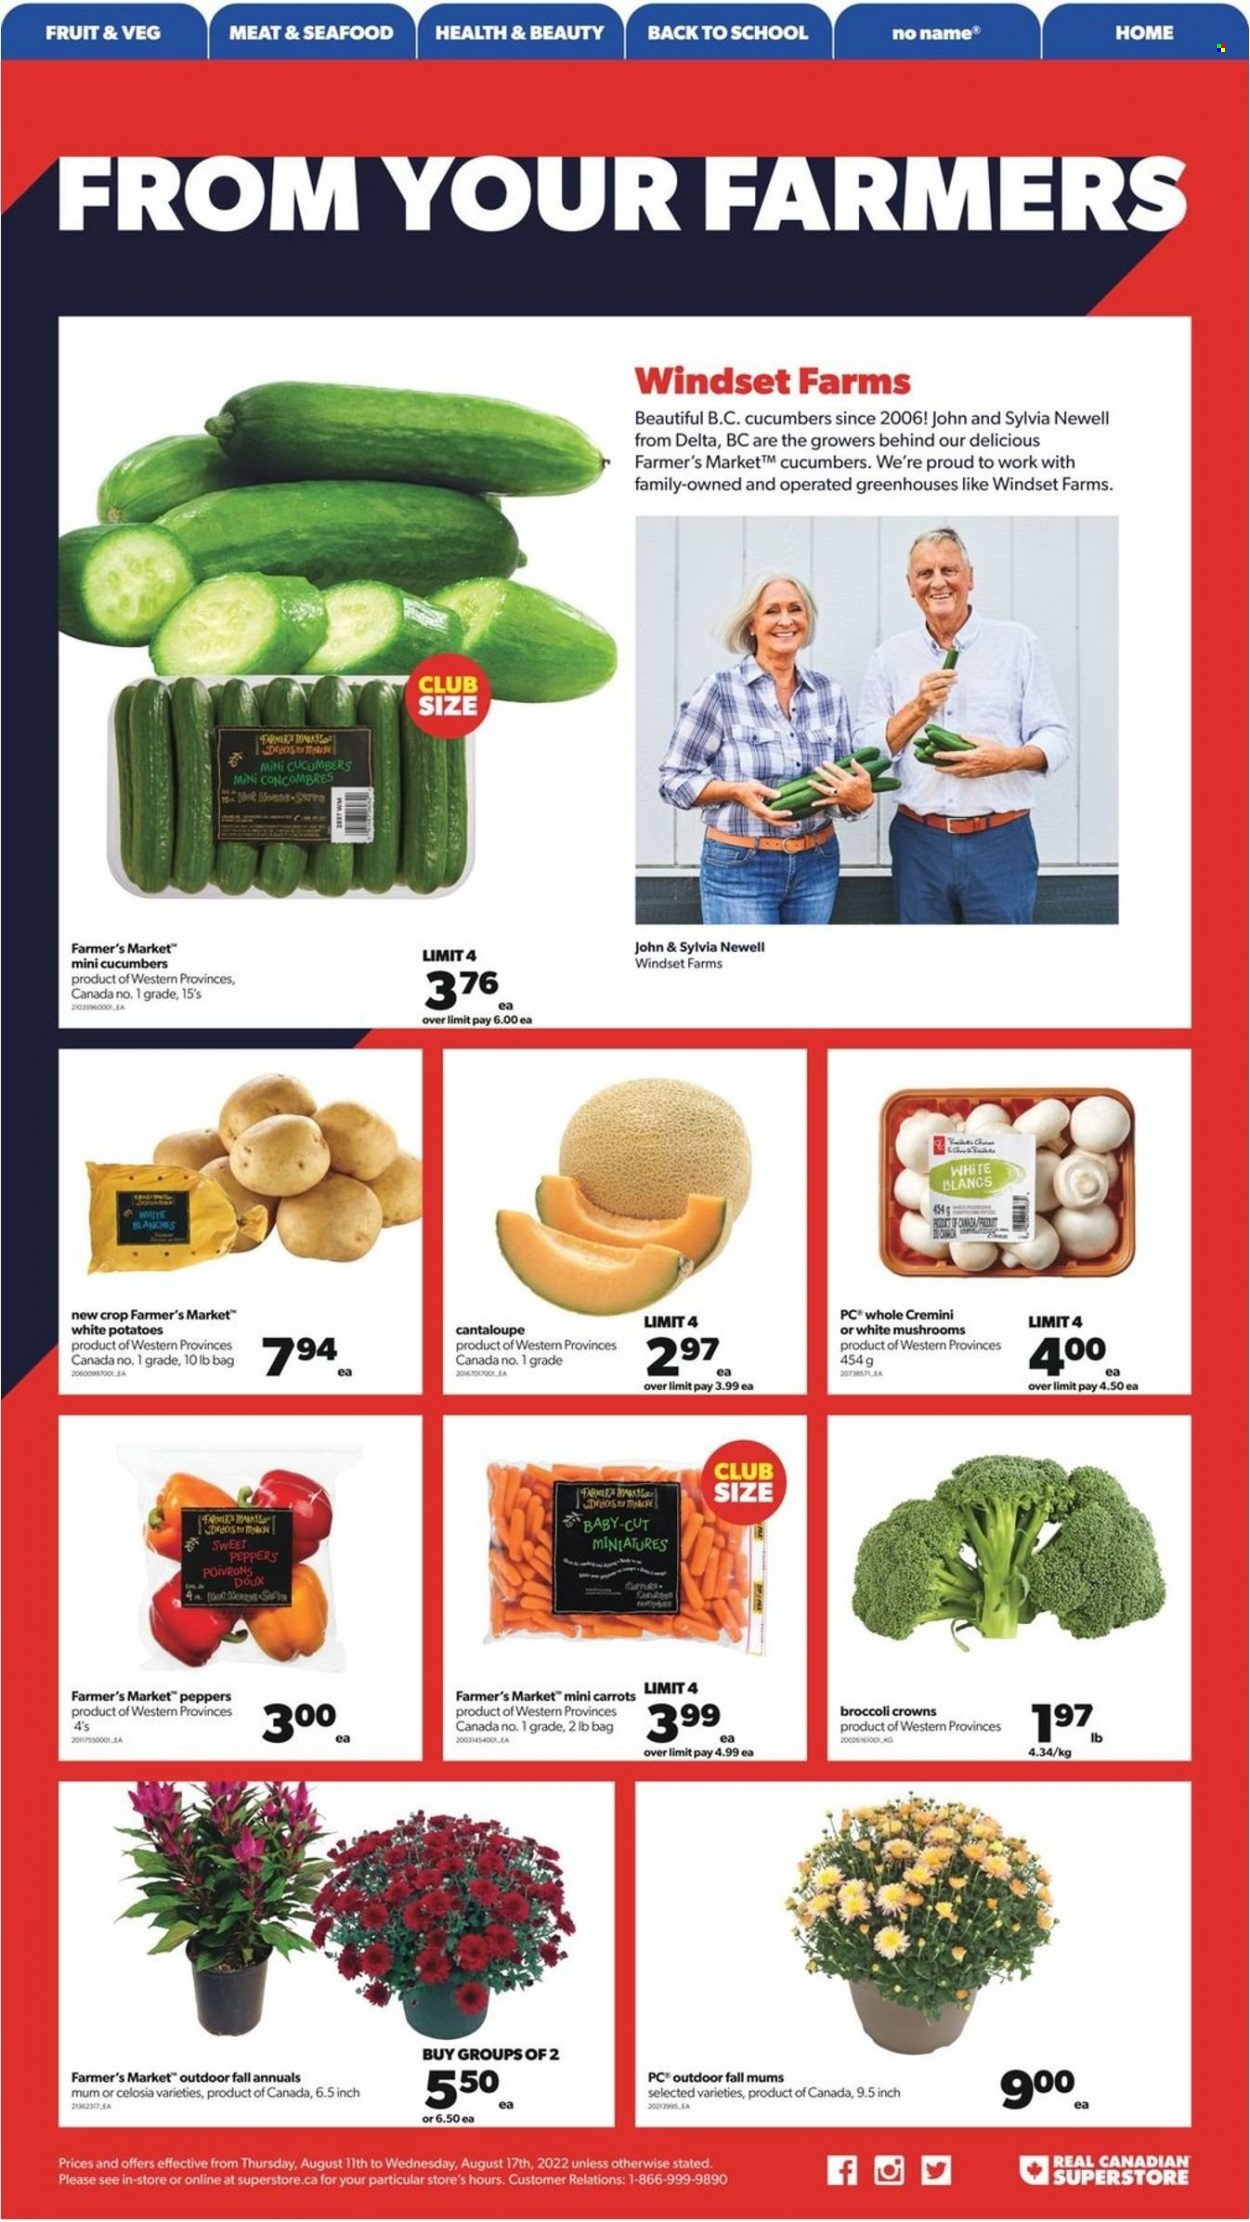 Real Canadian Superstore flyer  - August 11, 2022 - August 17, 2022.